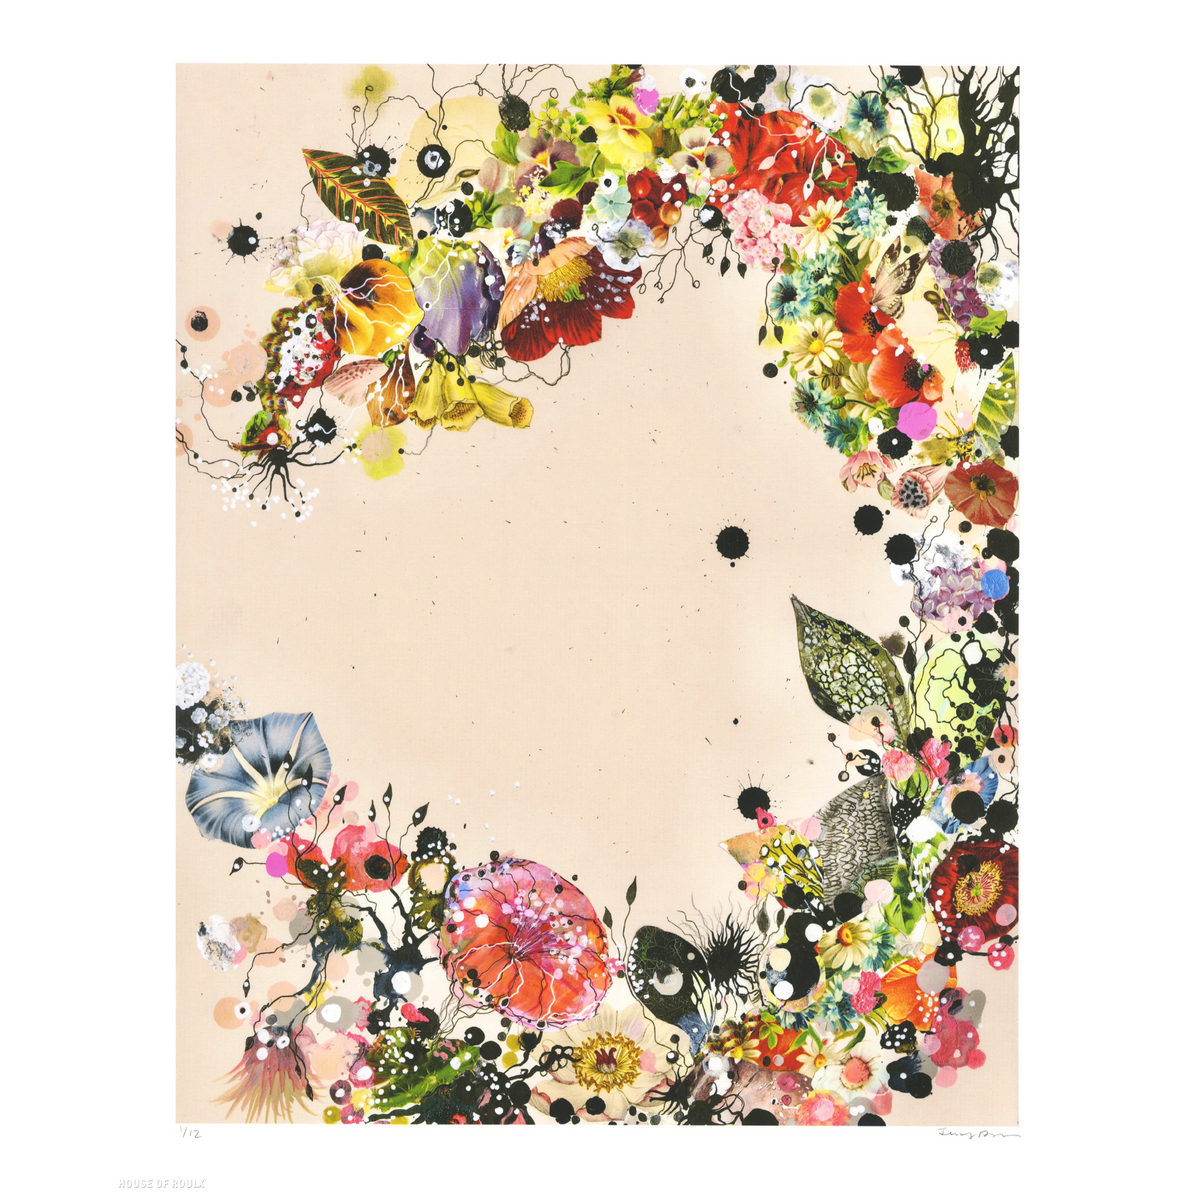 Jenny Brown &quot;Garland of Moon Flowers&quot; - Archival Print, Limited Edition of 12 - 14 x 17&quot;